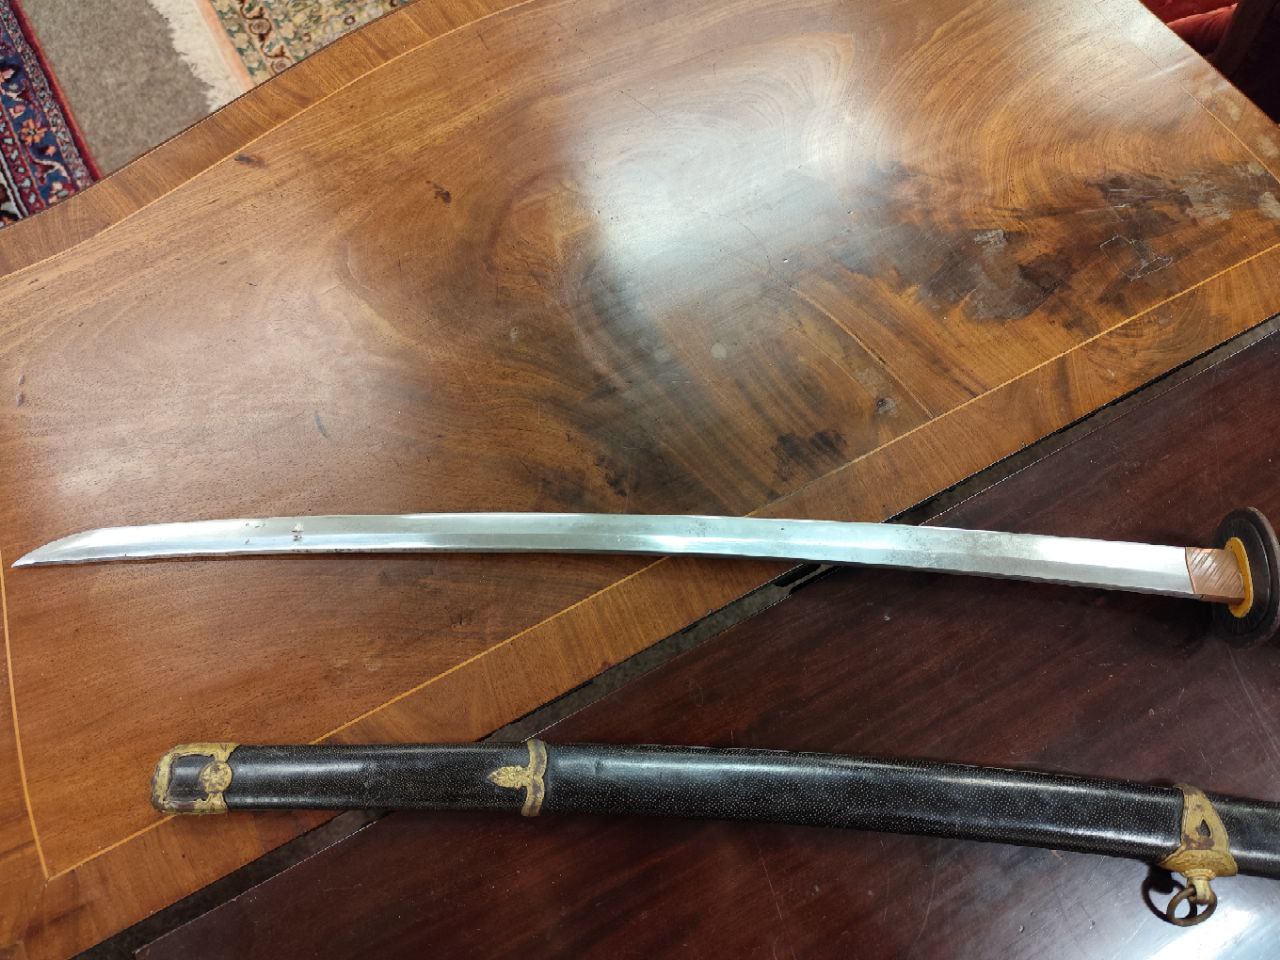 Militaria: A fine quality W.W.2 Japanese 'Katana' Naval Sword,' the handle with fish skin grip - Image 3 of 11